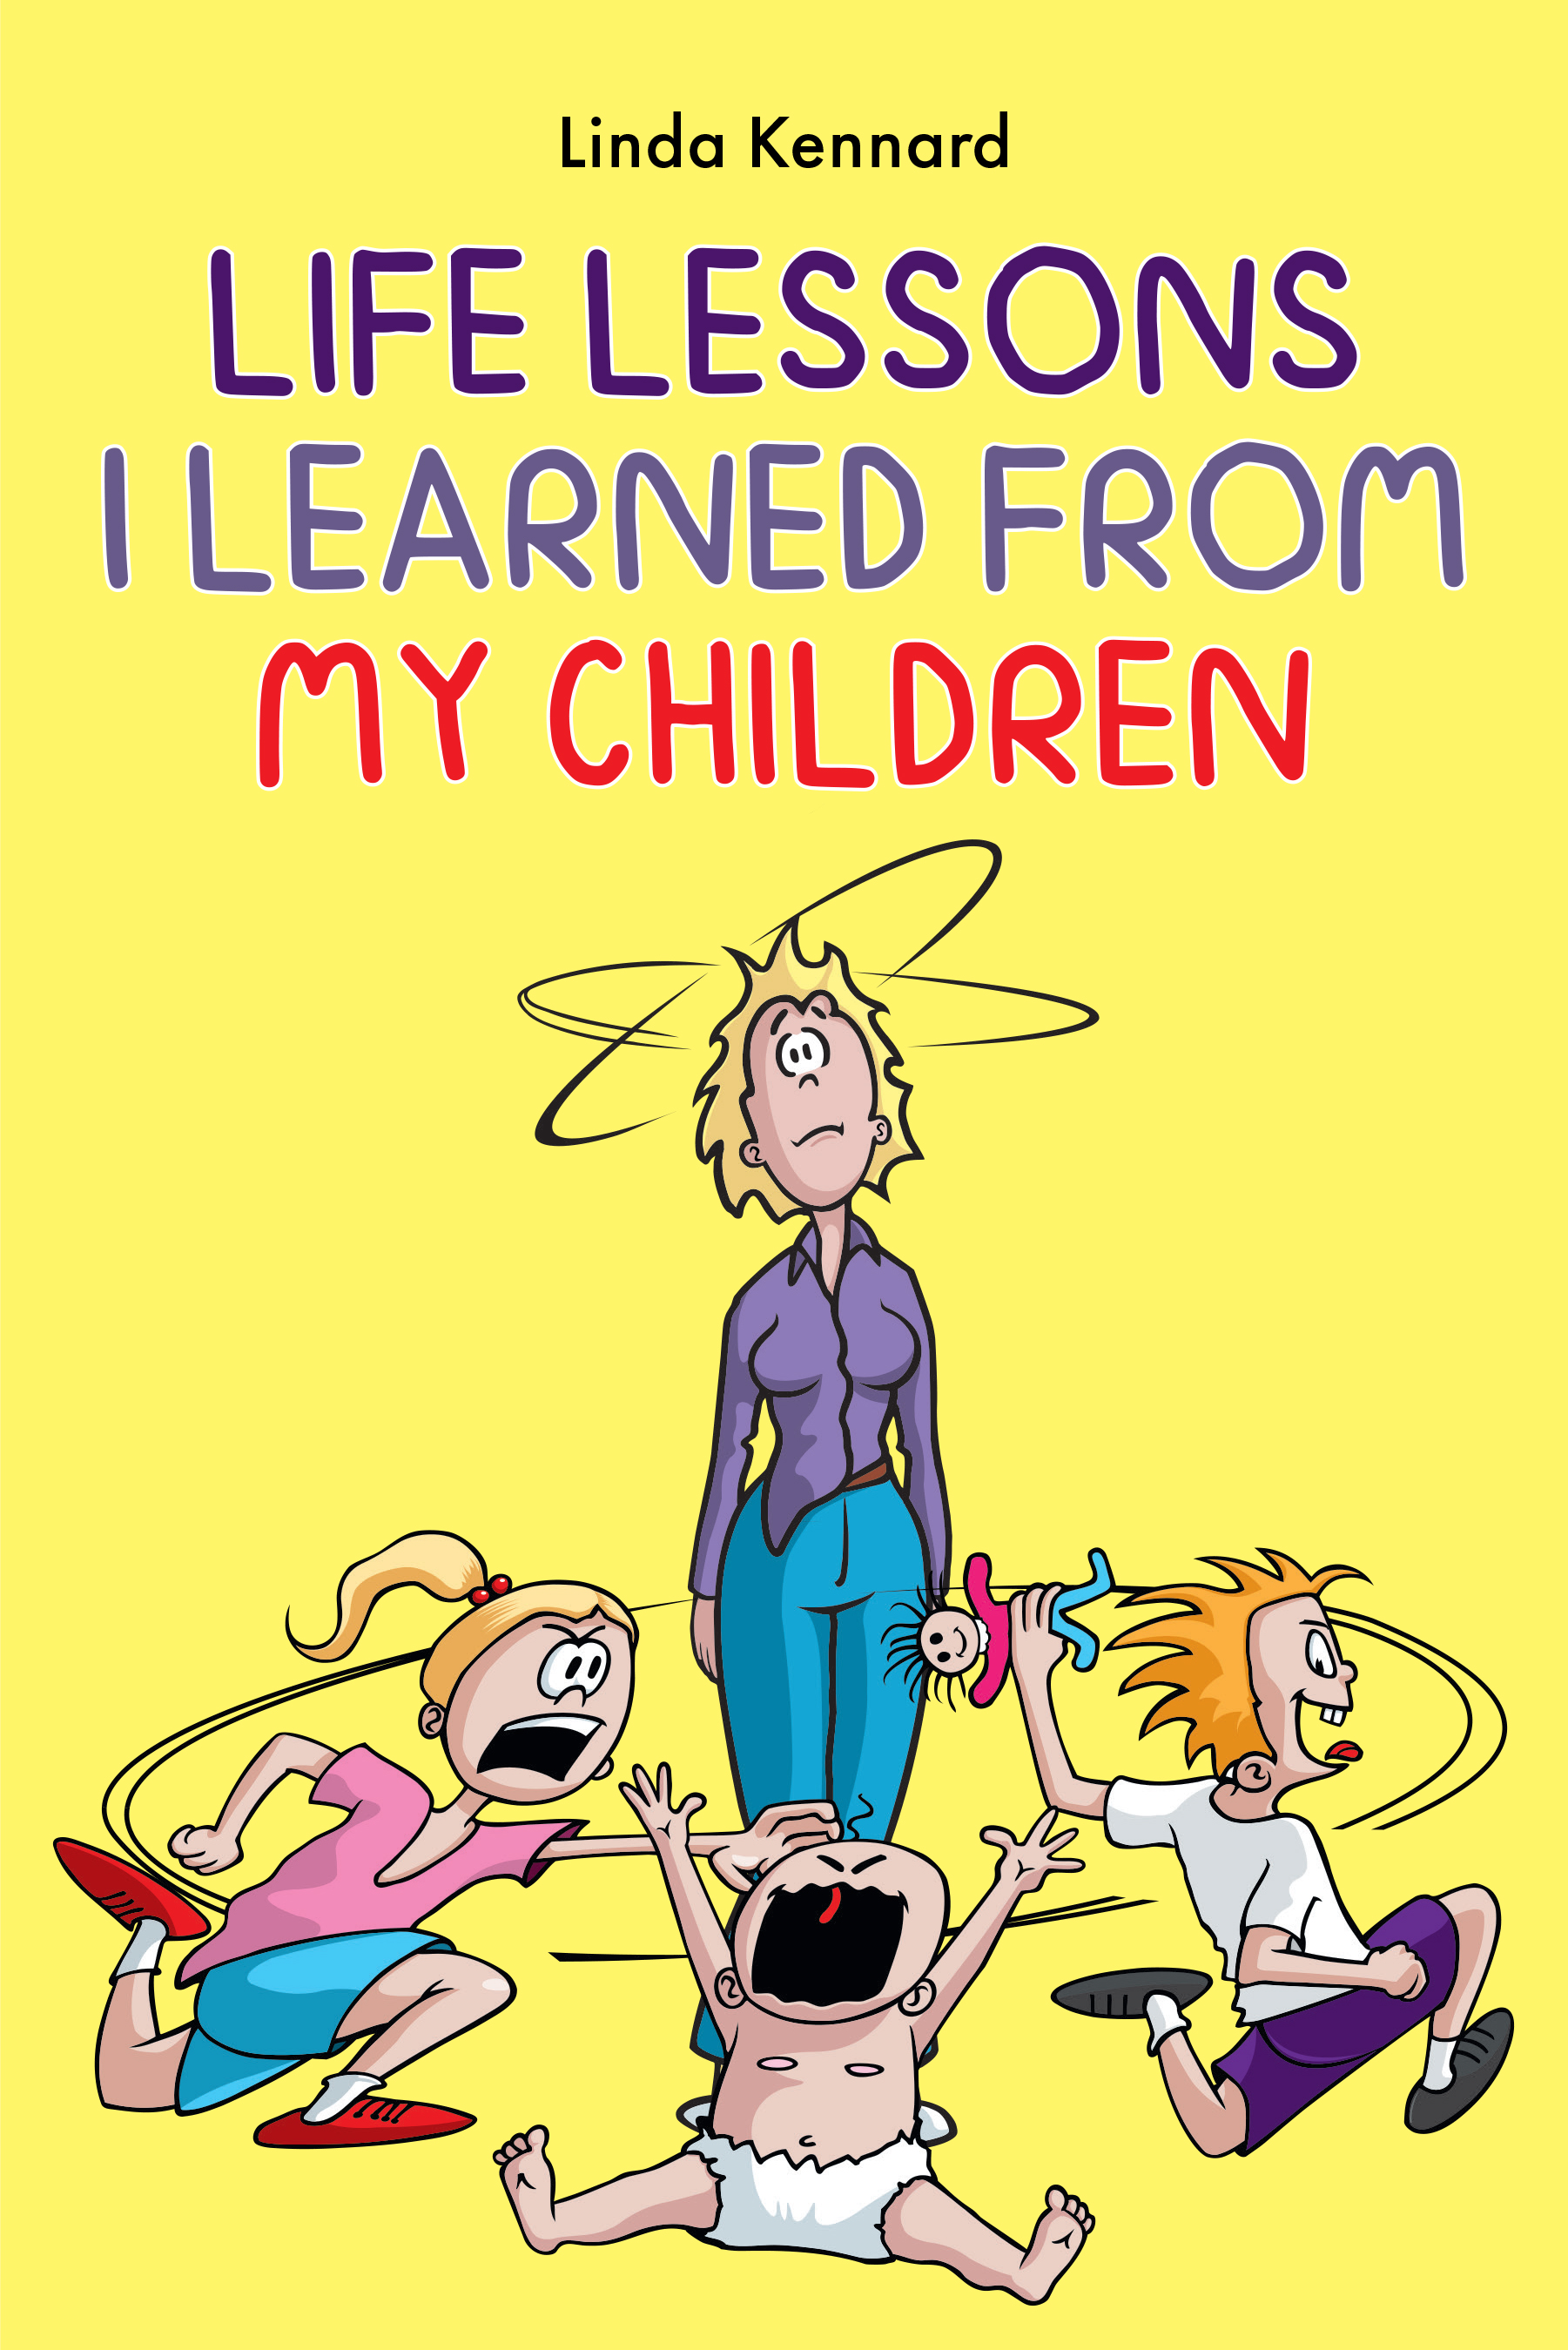 Author Linda Kennard’s New Book, "Life Lessons I Learned from My Children," is a Heartwarming Memoir Detailing Insights Gleaned by the Author Through Parenthood